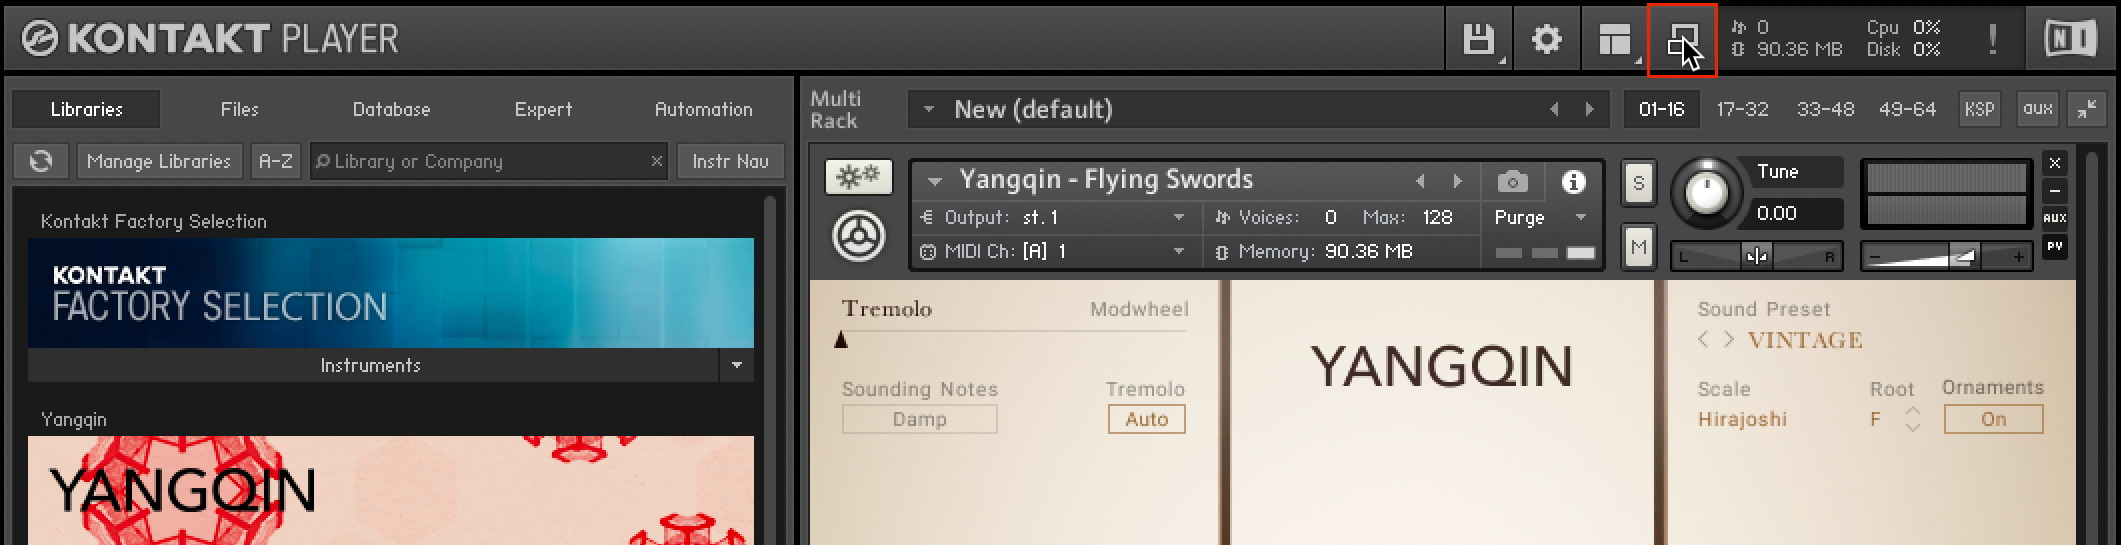 The upper part of the Kontakt Player interface, with the Minimize View button highlighted.